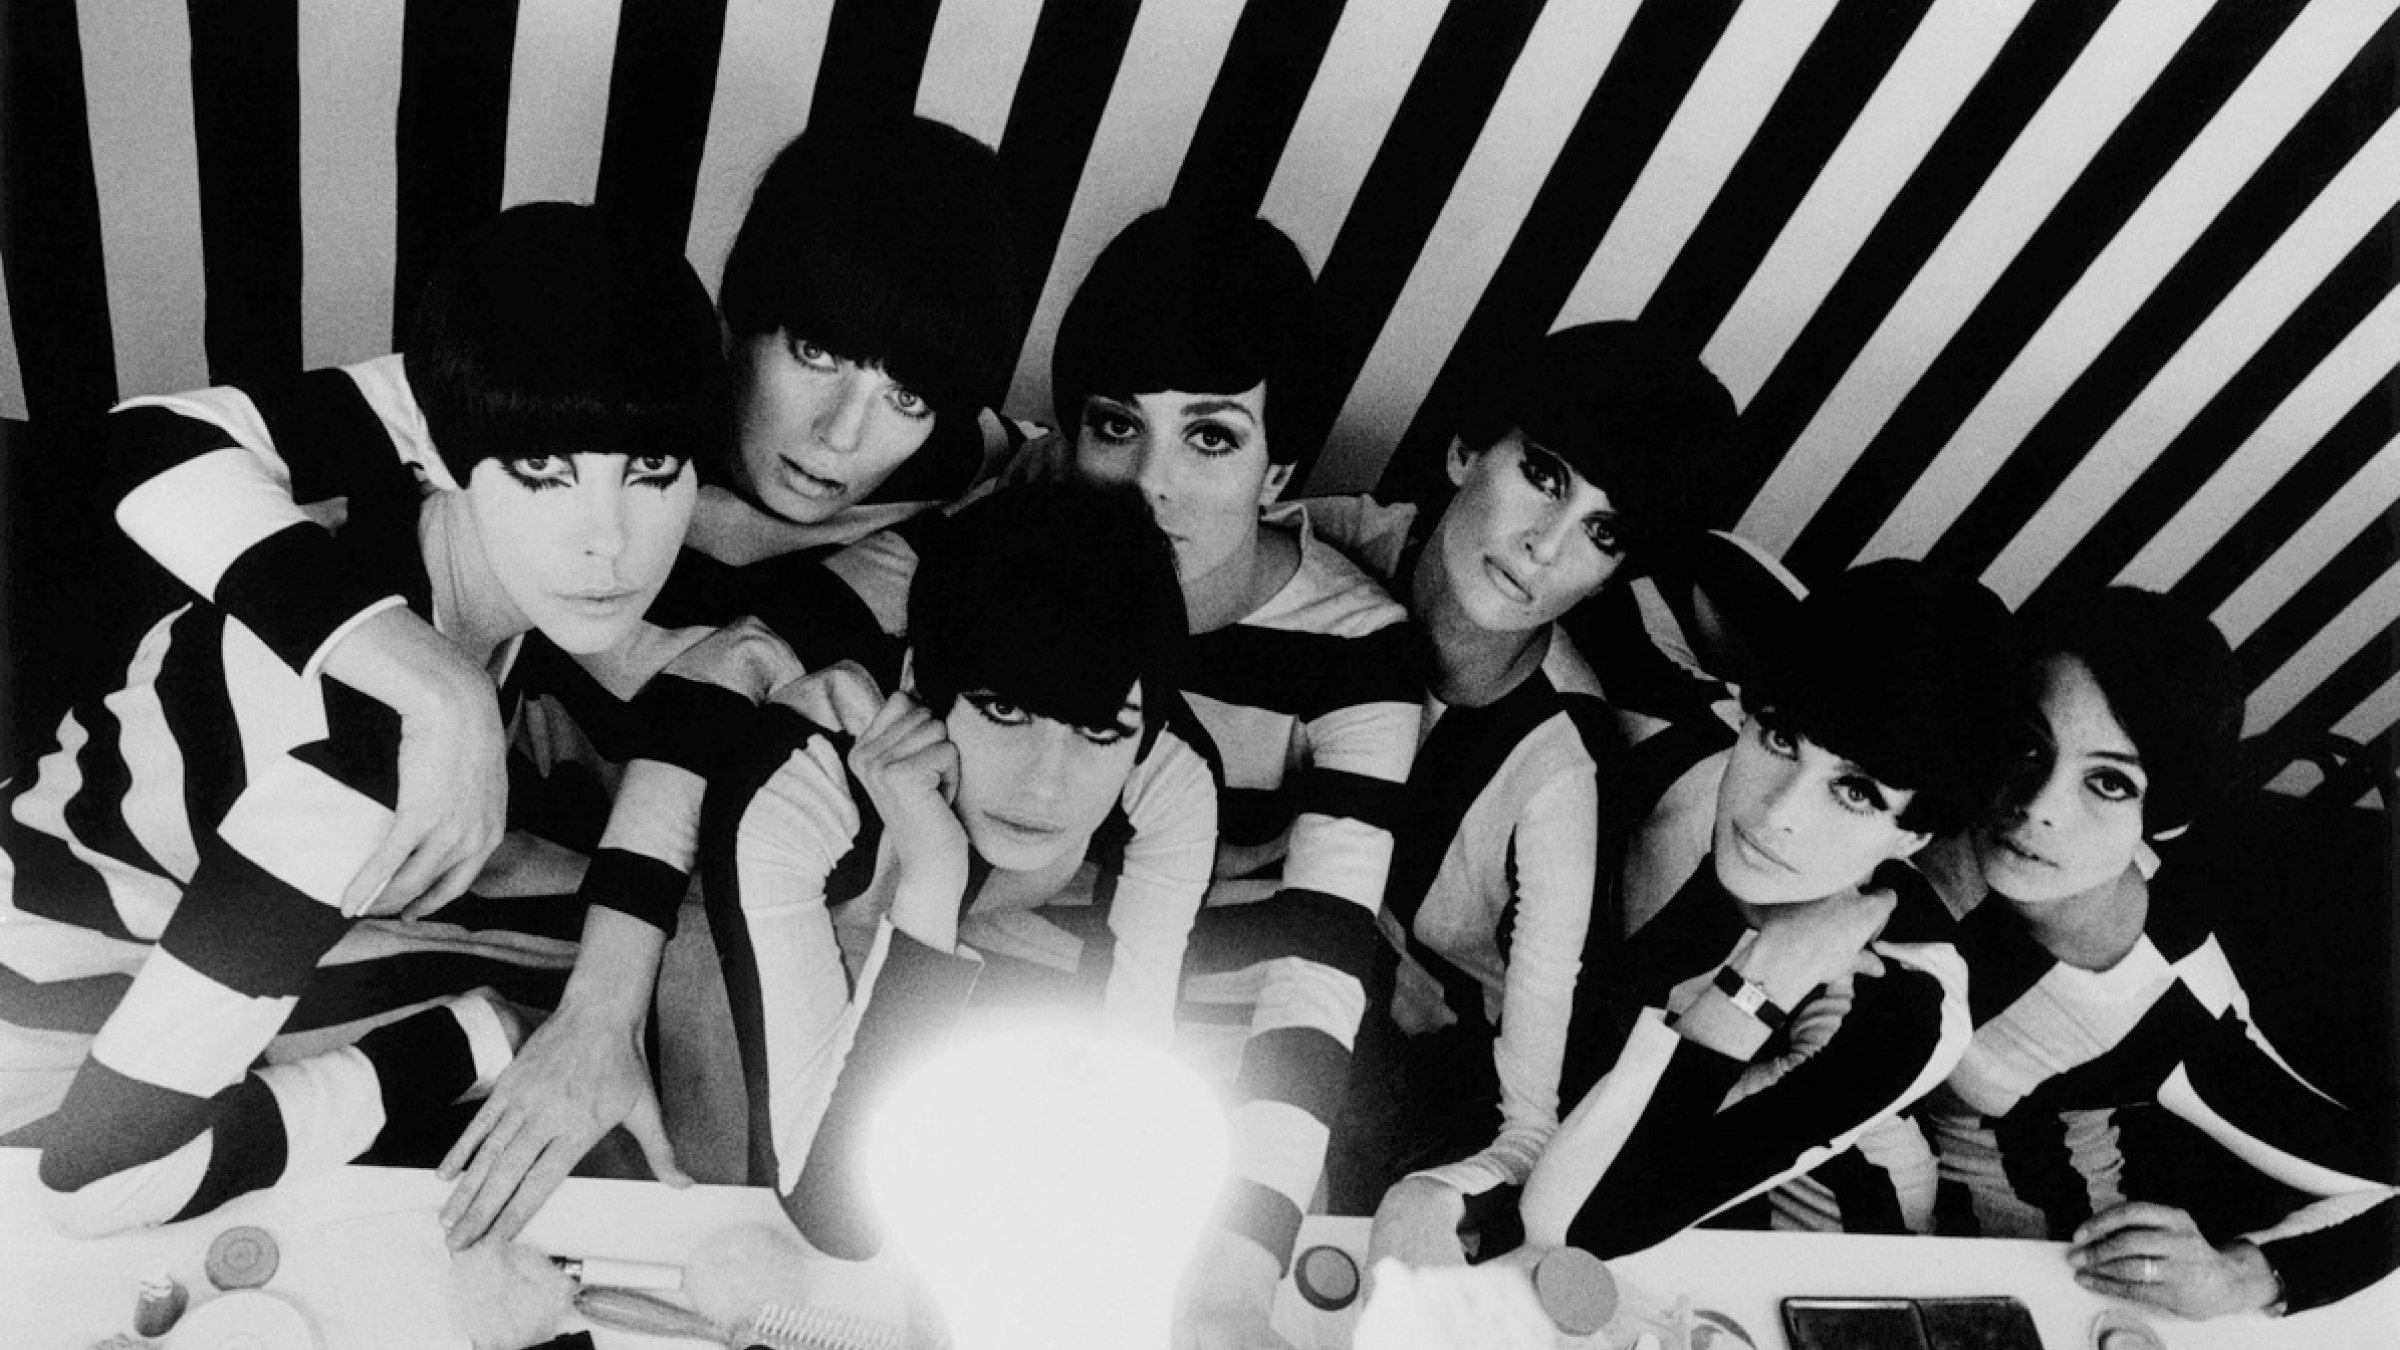 Without Compromise: The Cinema of William Klein | Museum of Arts